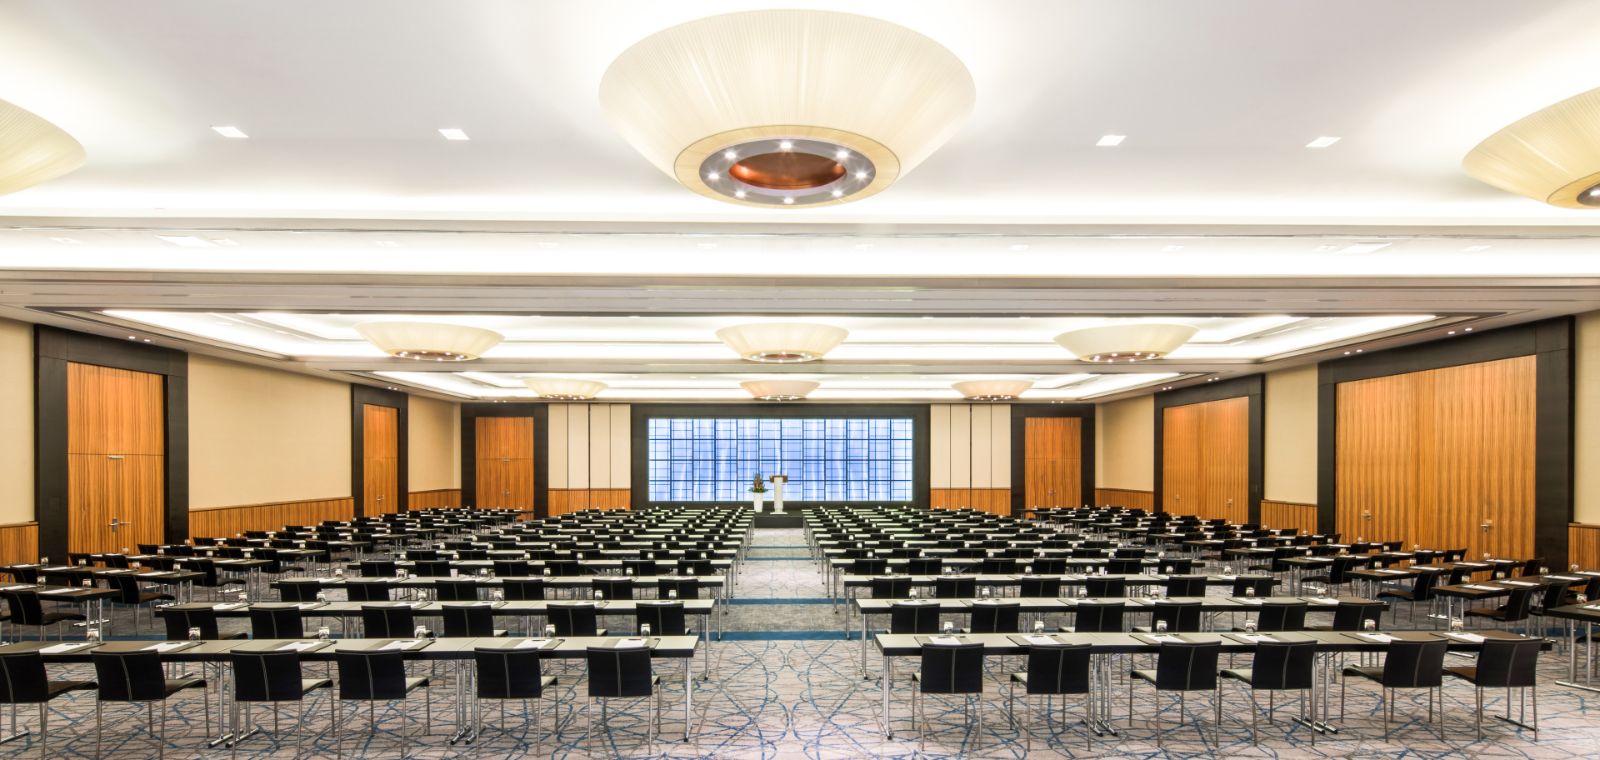 A large event room with many seating options in the event location Dusseldorf